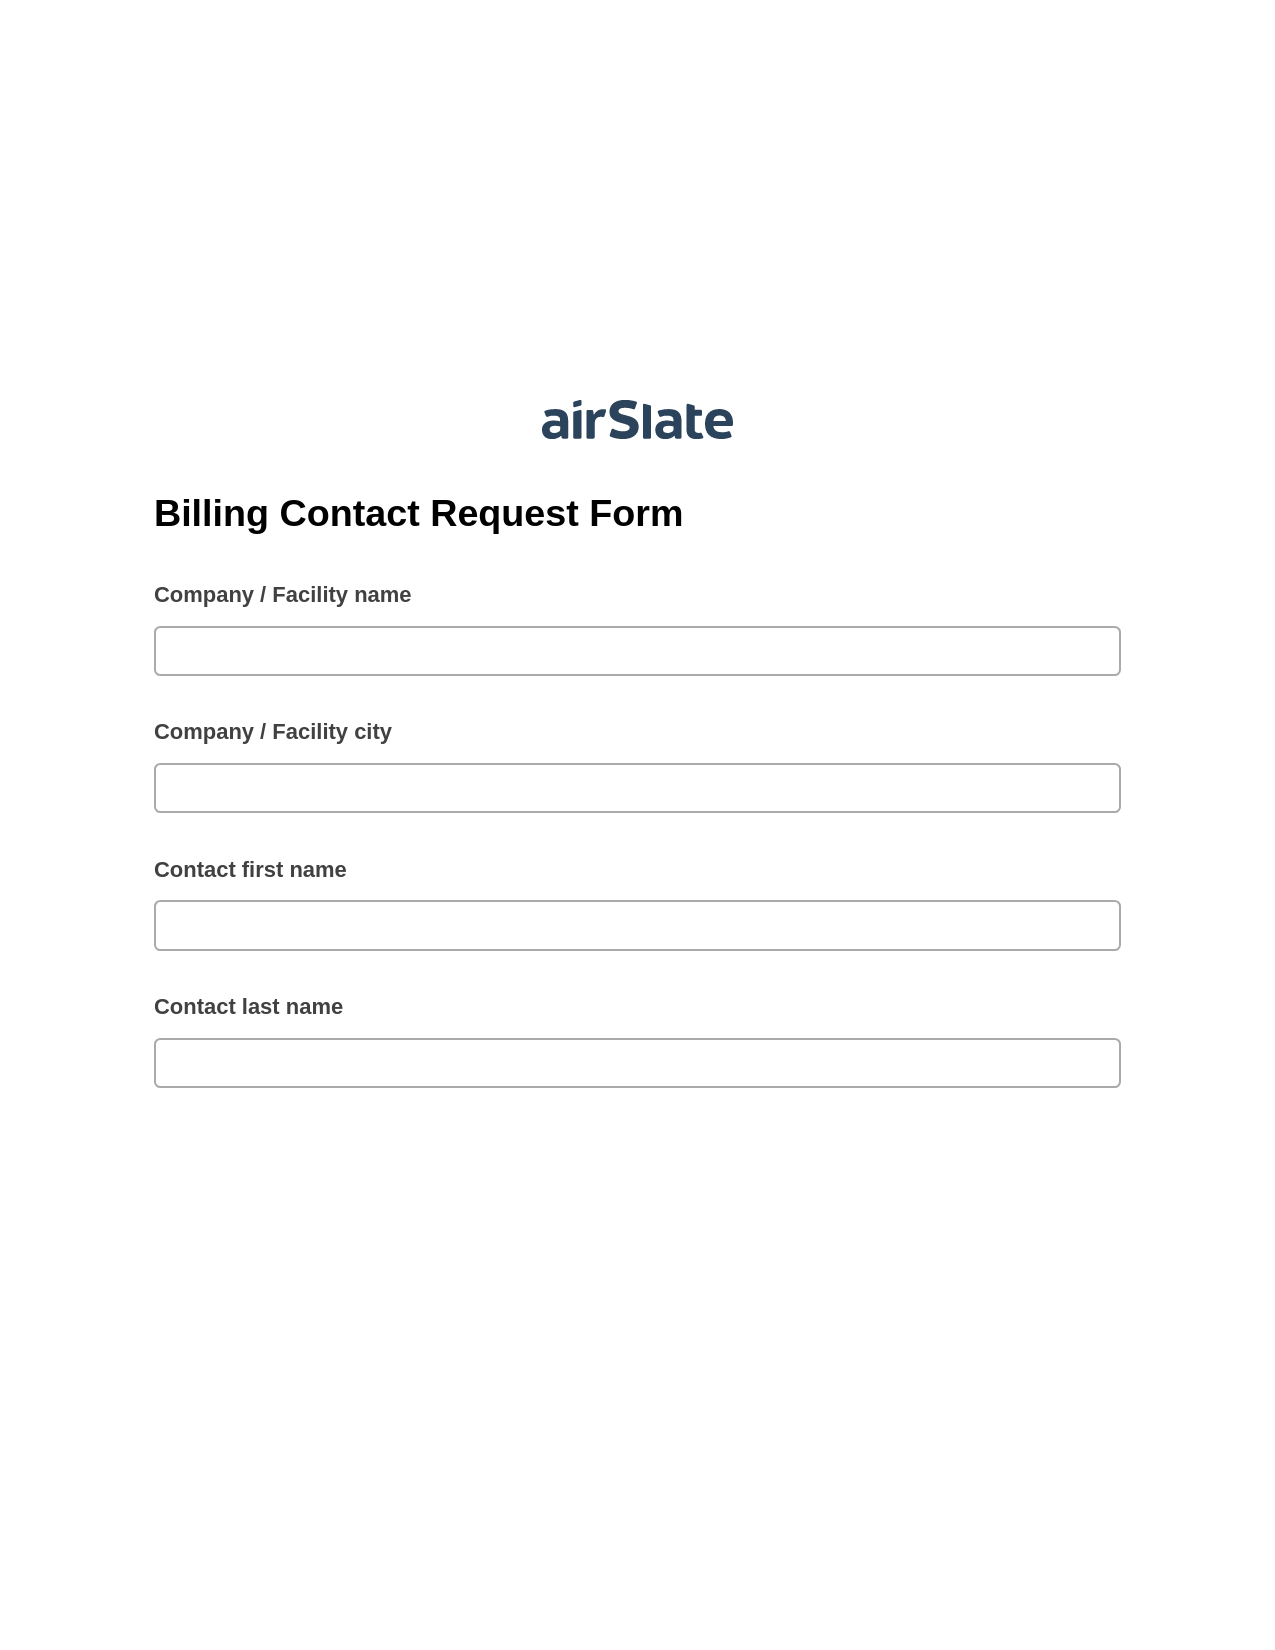 Billing Contact Request Form System Bot - Slack Two-Way Binding Bot, Send Mailchimp Campaign Bot, Export to Google Sheet Bot